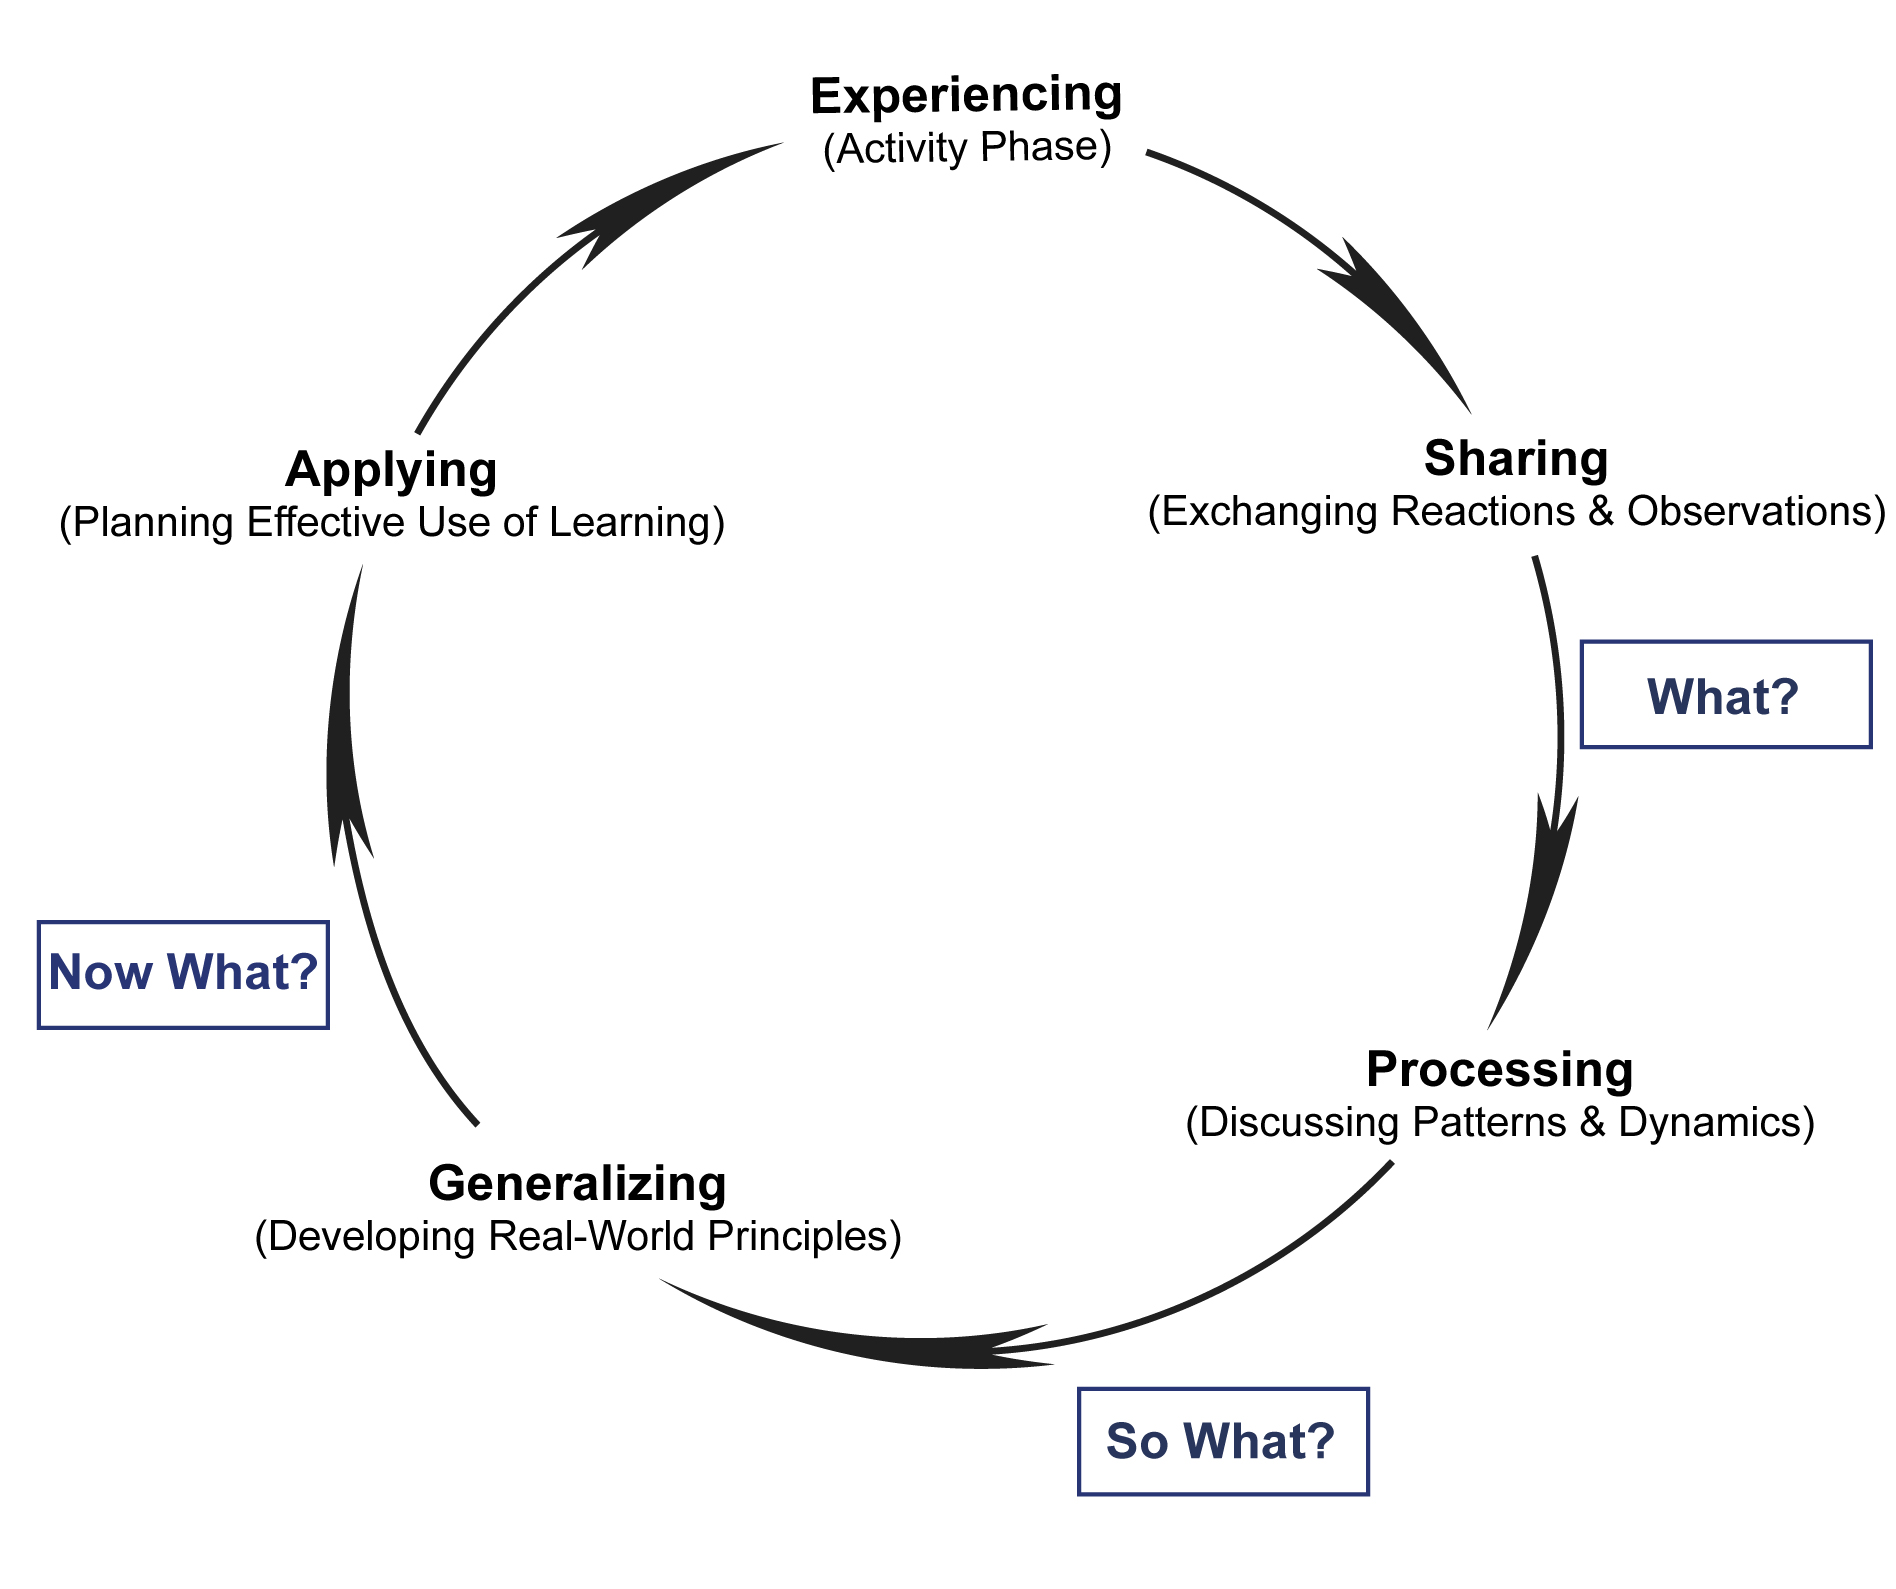  Continuous Reflection and the Experiential Learning Cycle  Continuous Reflection and the Experiential Learning Cycle